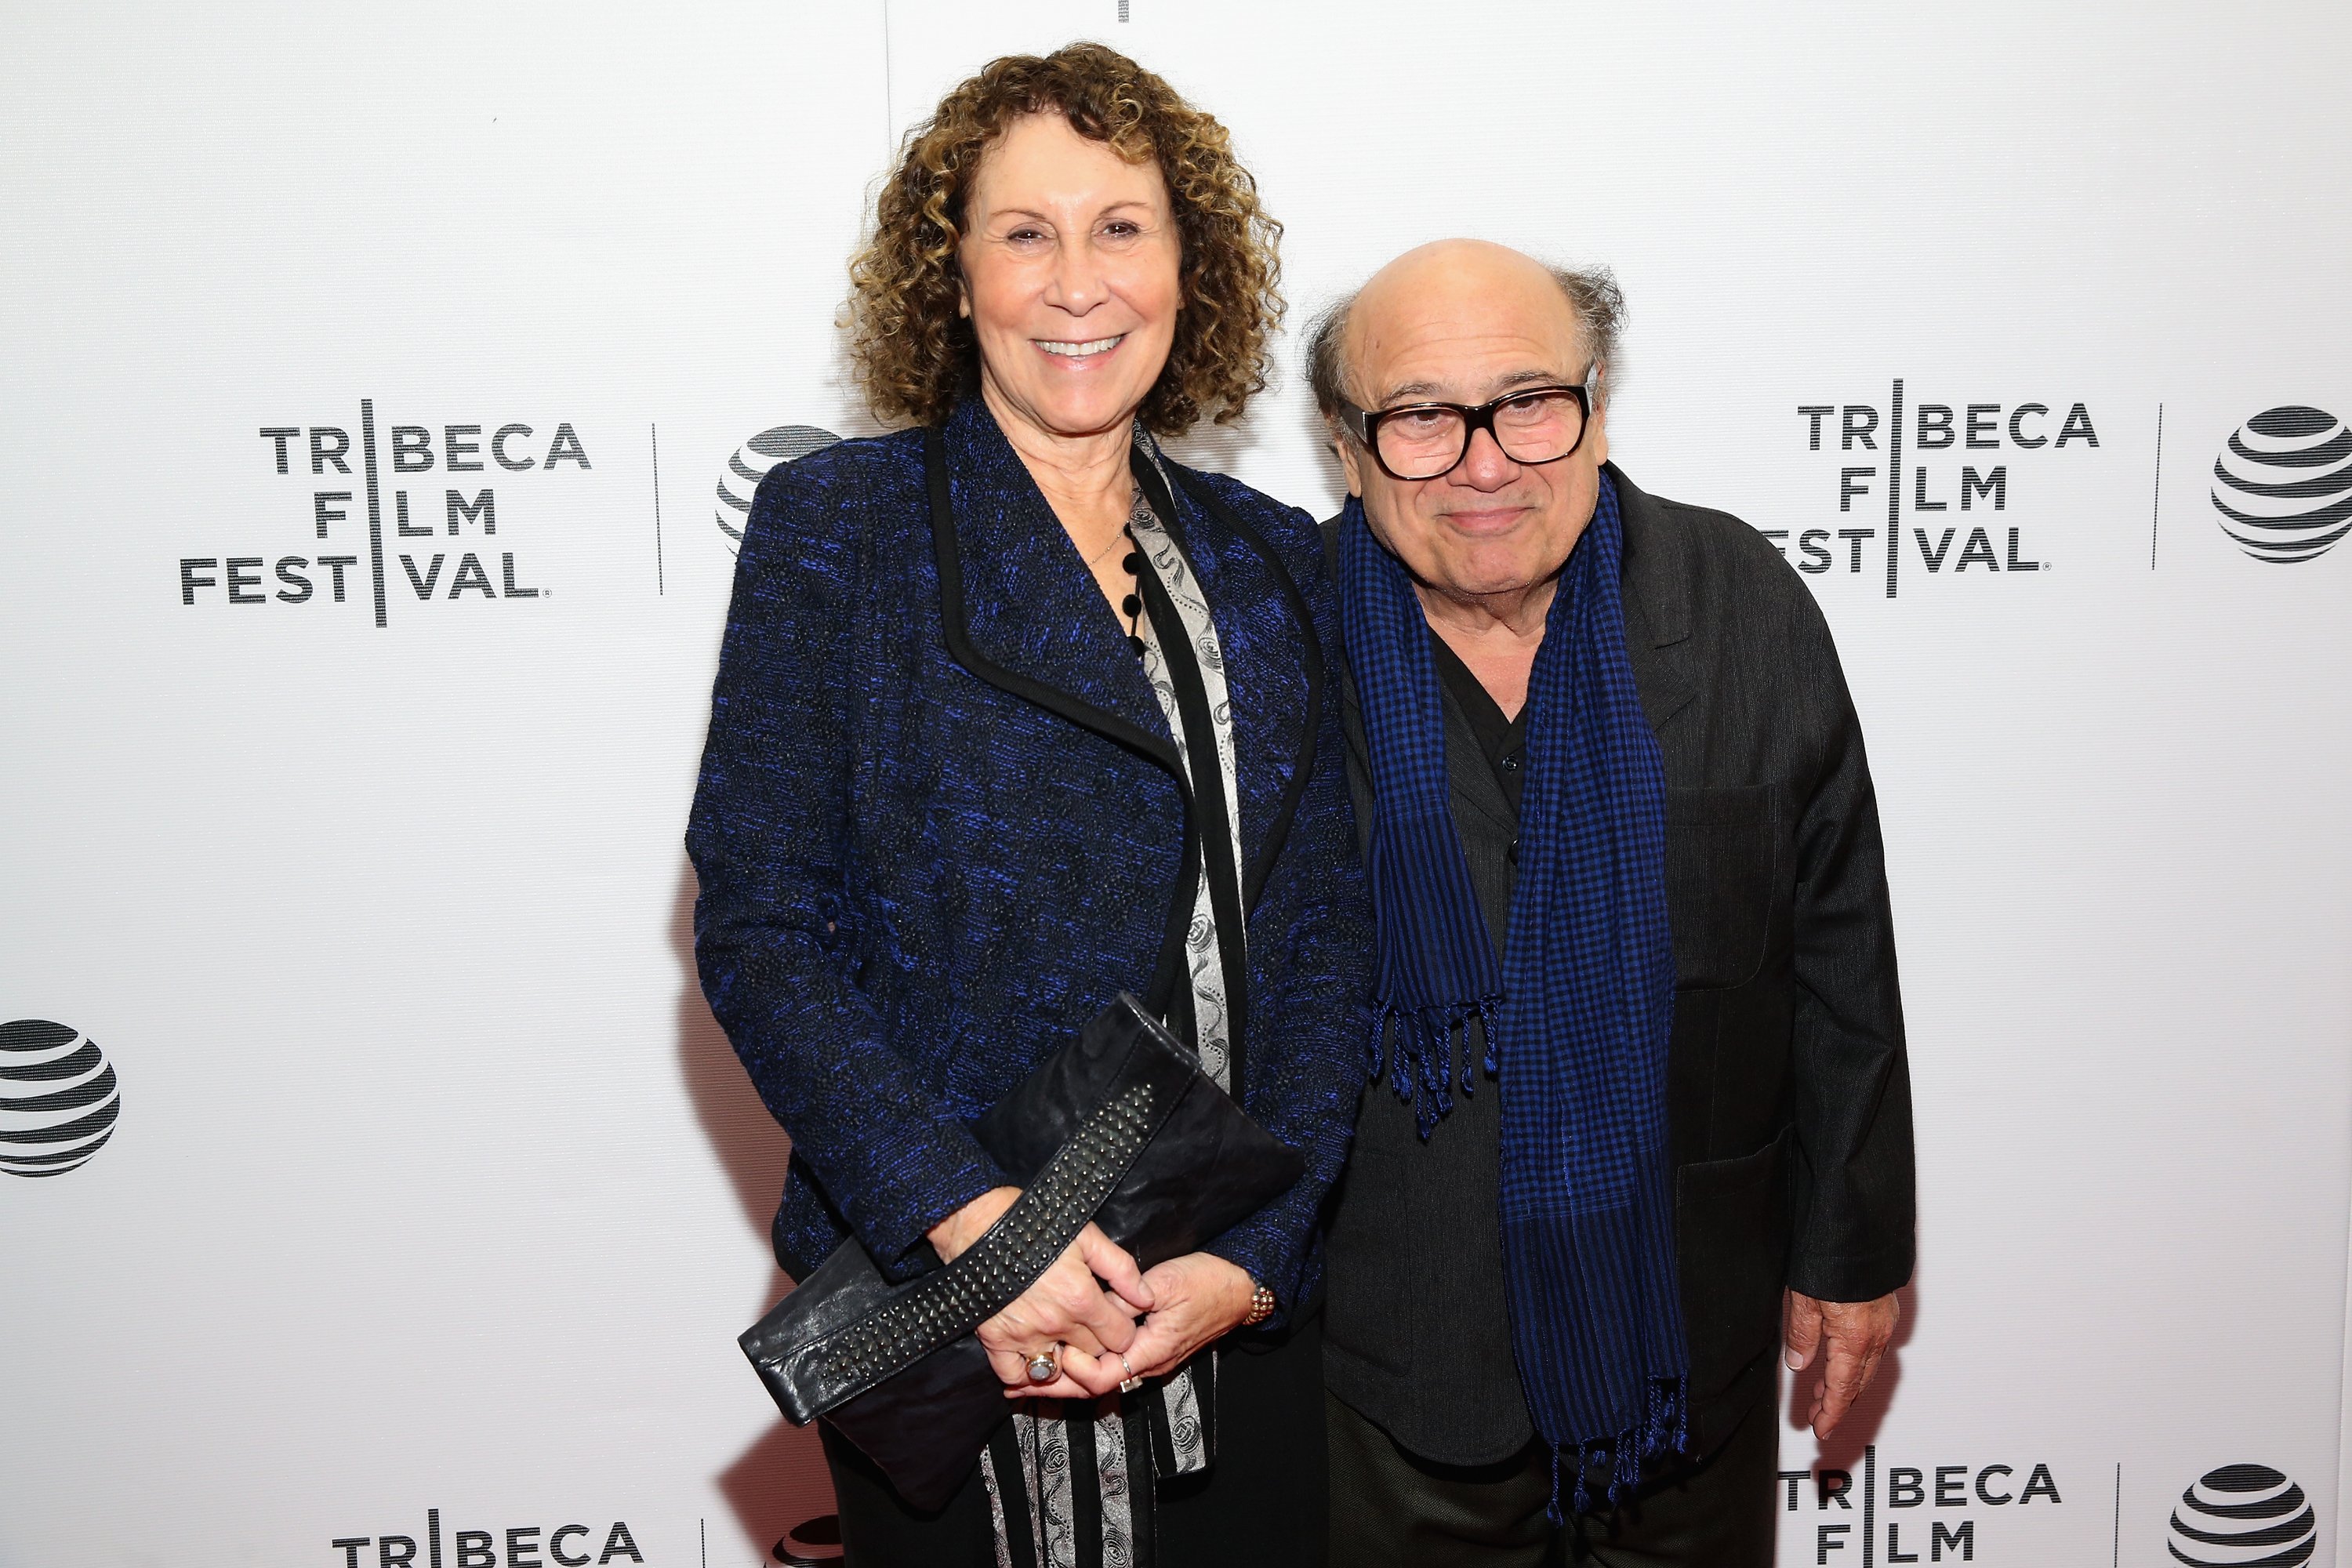 Actors Rhea Perlman and Danny DeVito attend the Tribeca Film Festival Shorts: New York Now at Regal Battery Park Cinemas on April 15, 2016 in New York City. | Source: Getty Images